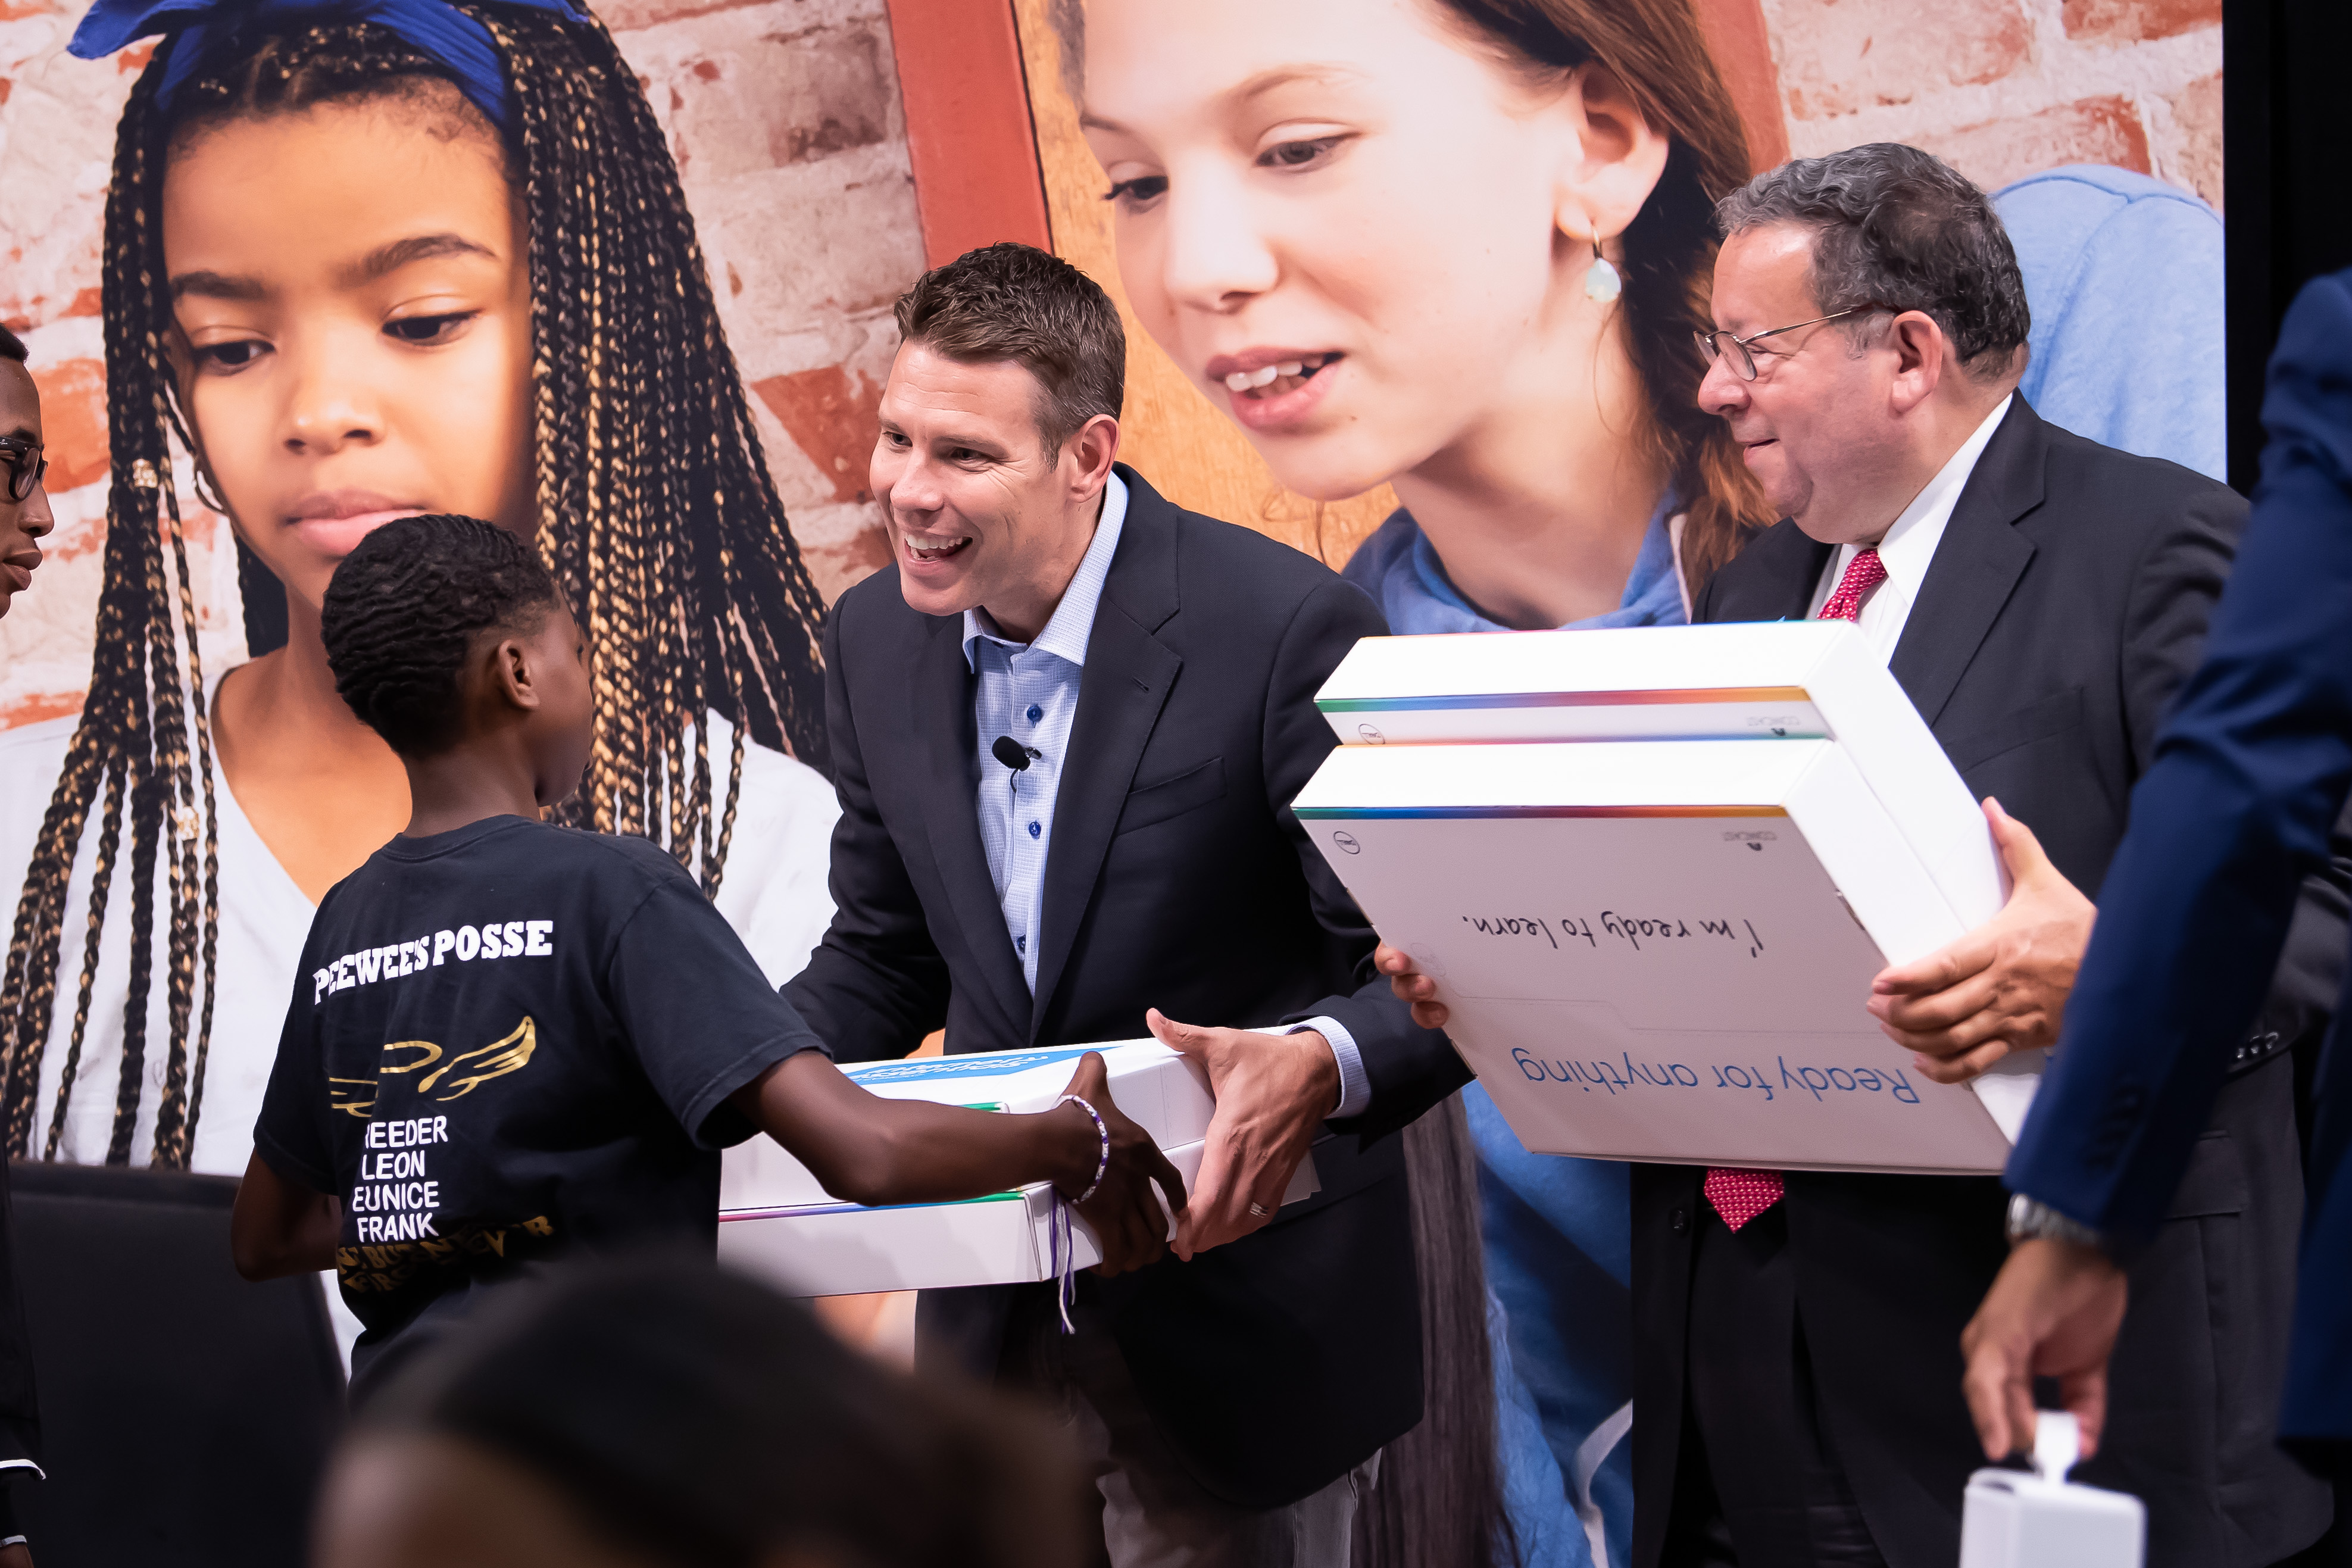 David L. Cohen and Jeremy Ford distribute free Dell laptops to children.